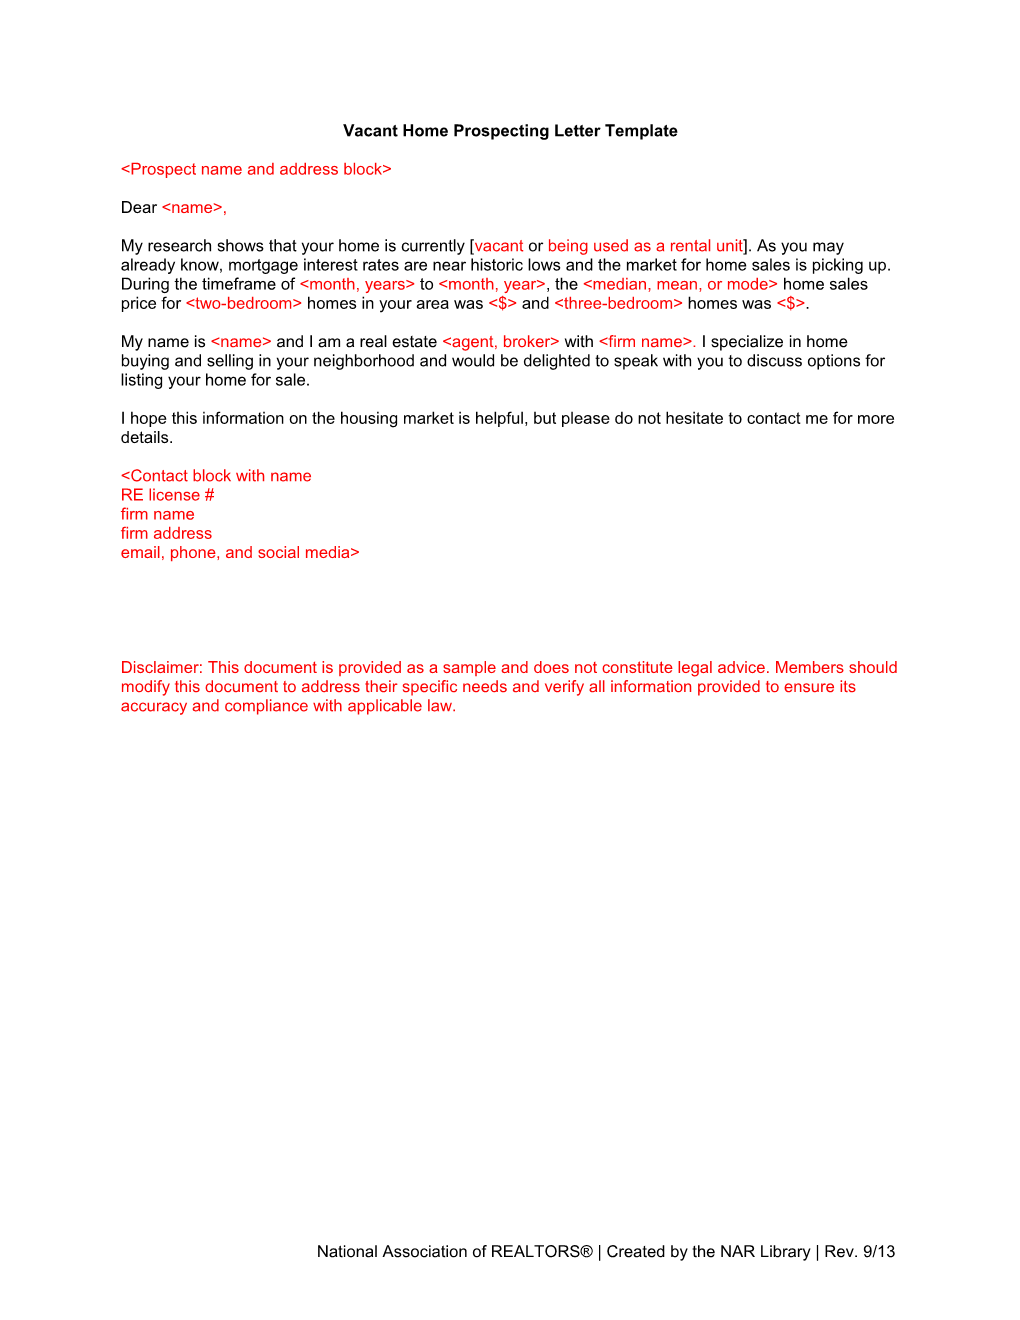 Vacant Home Prospecting Letter Template